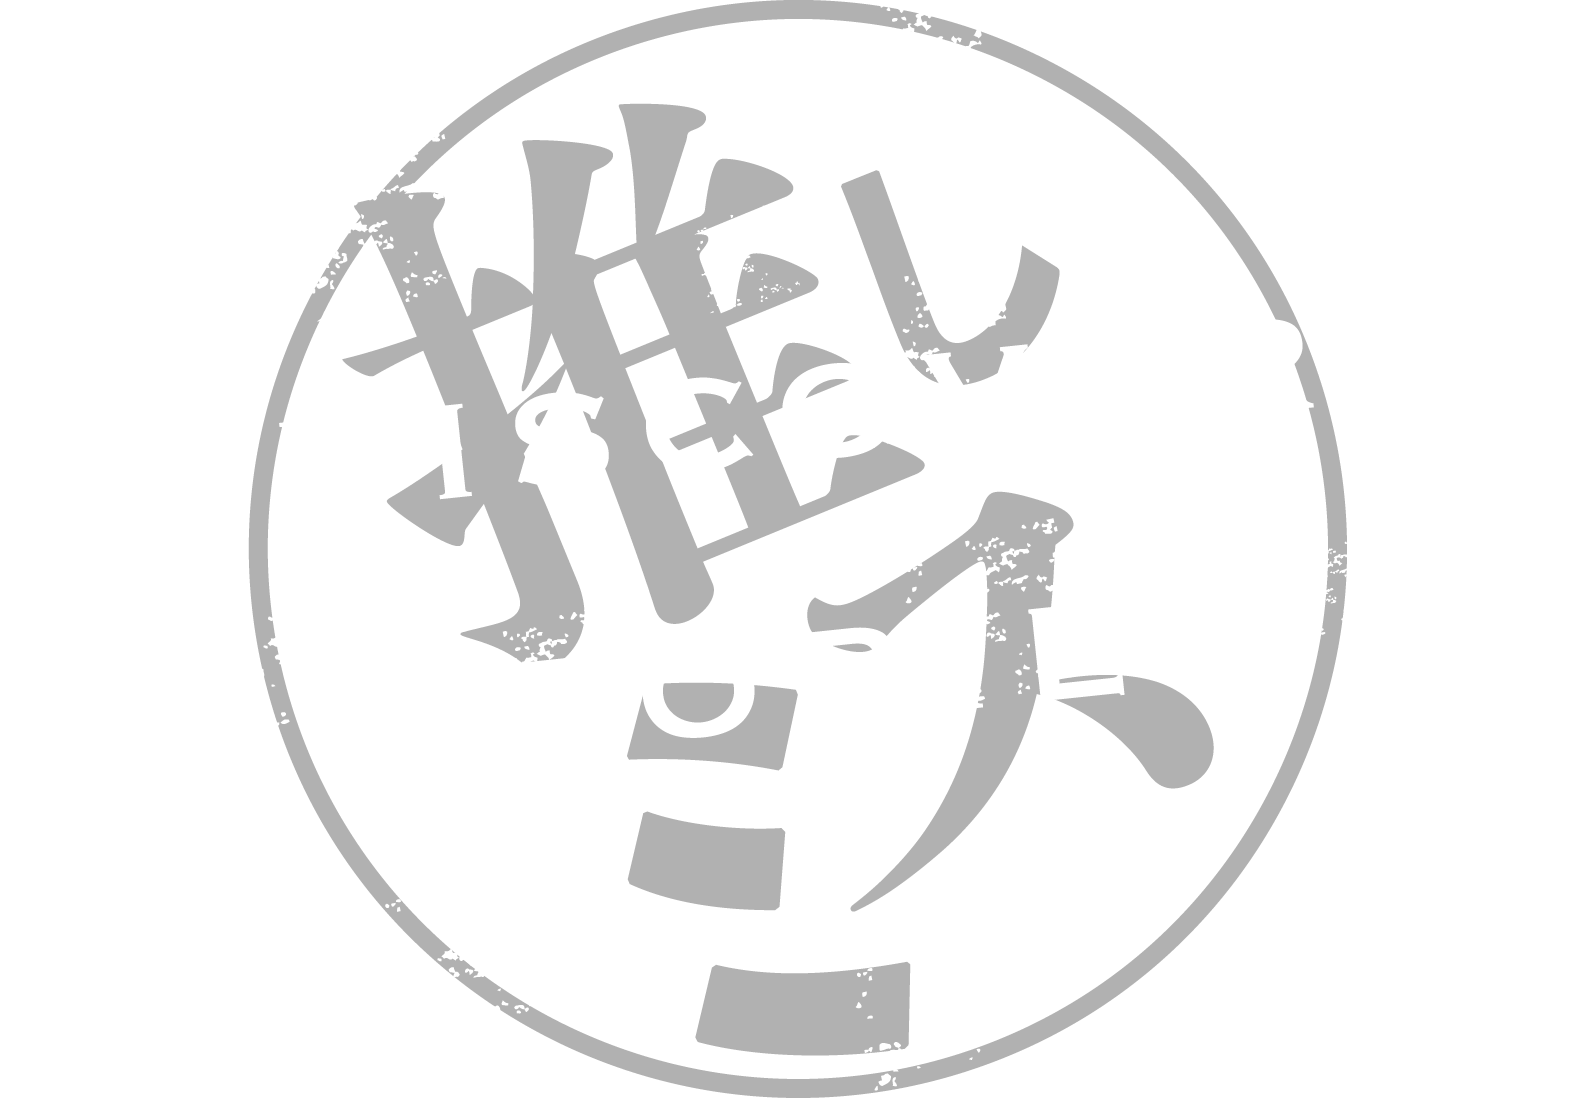 rediscovered stories